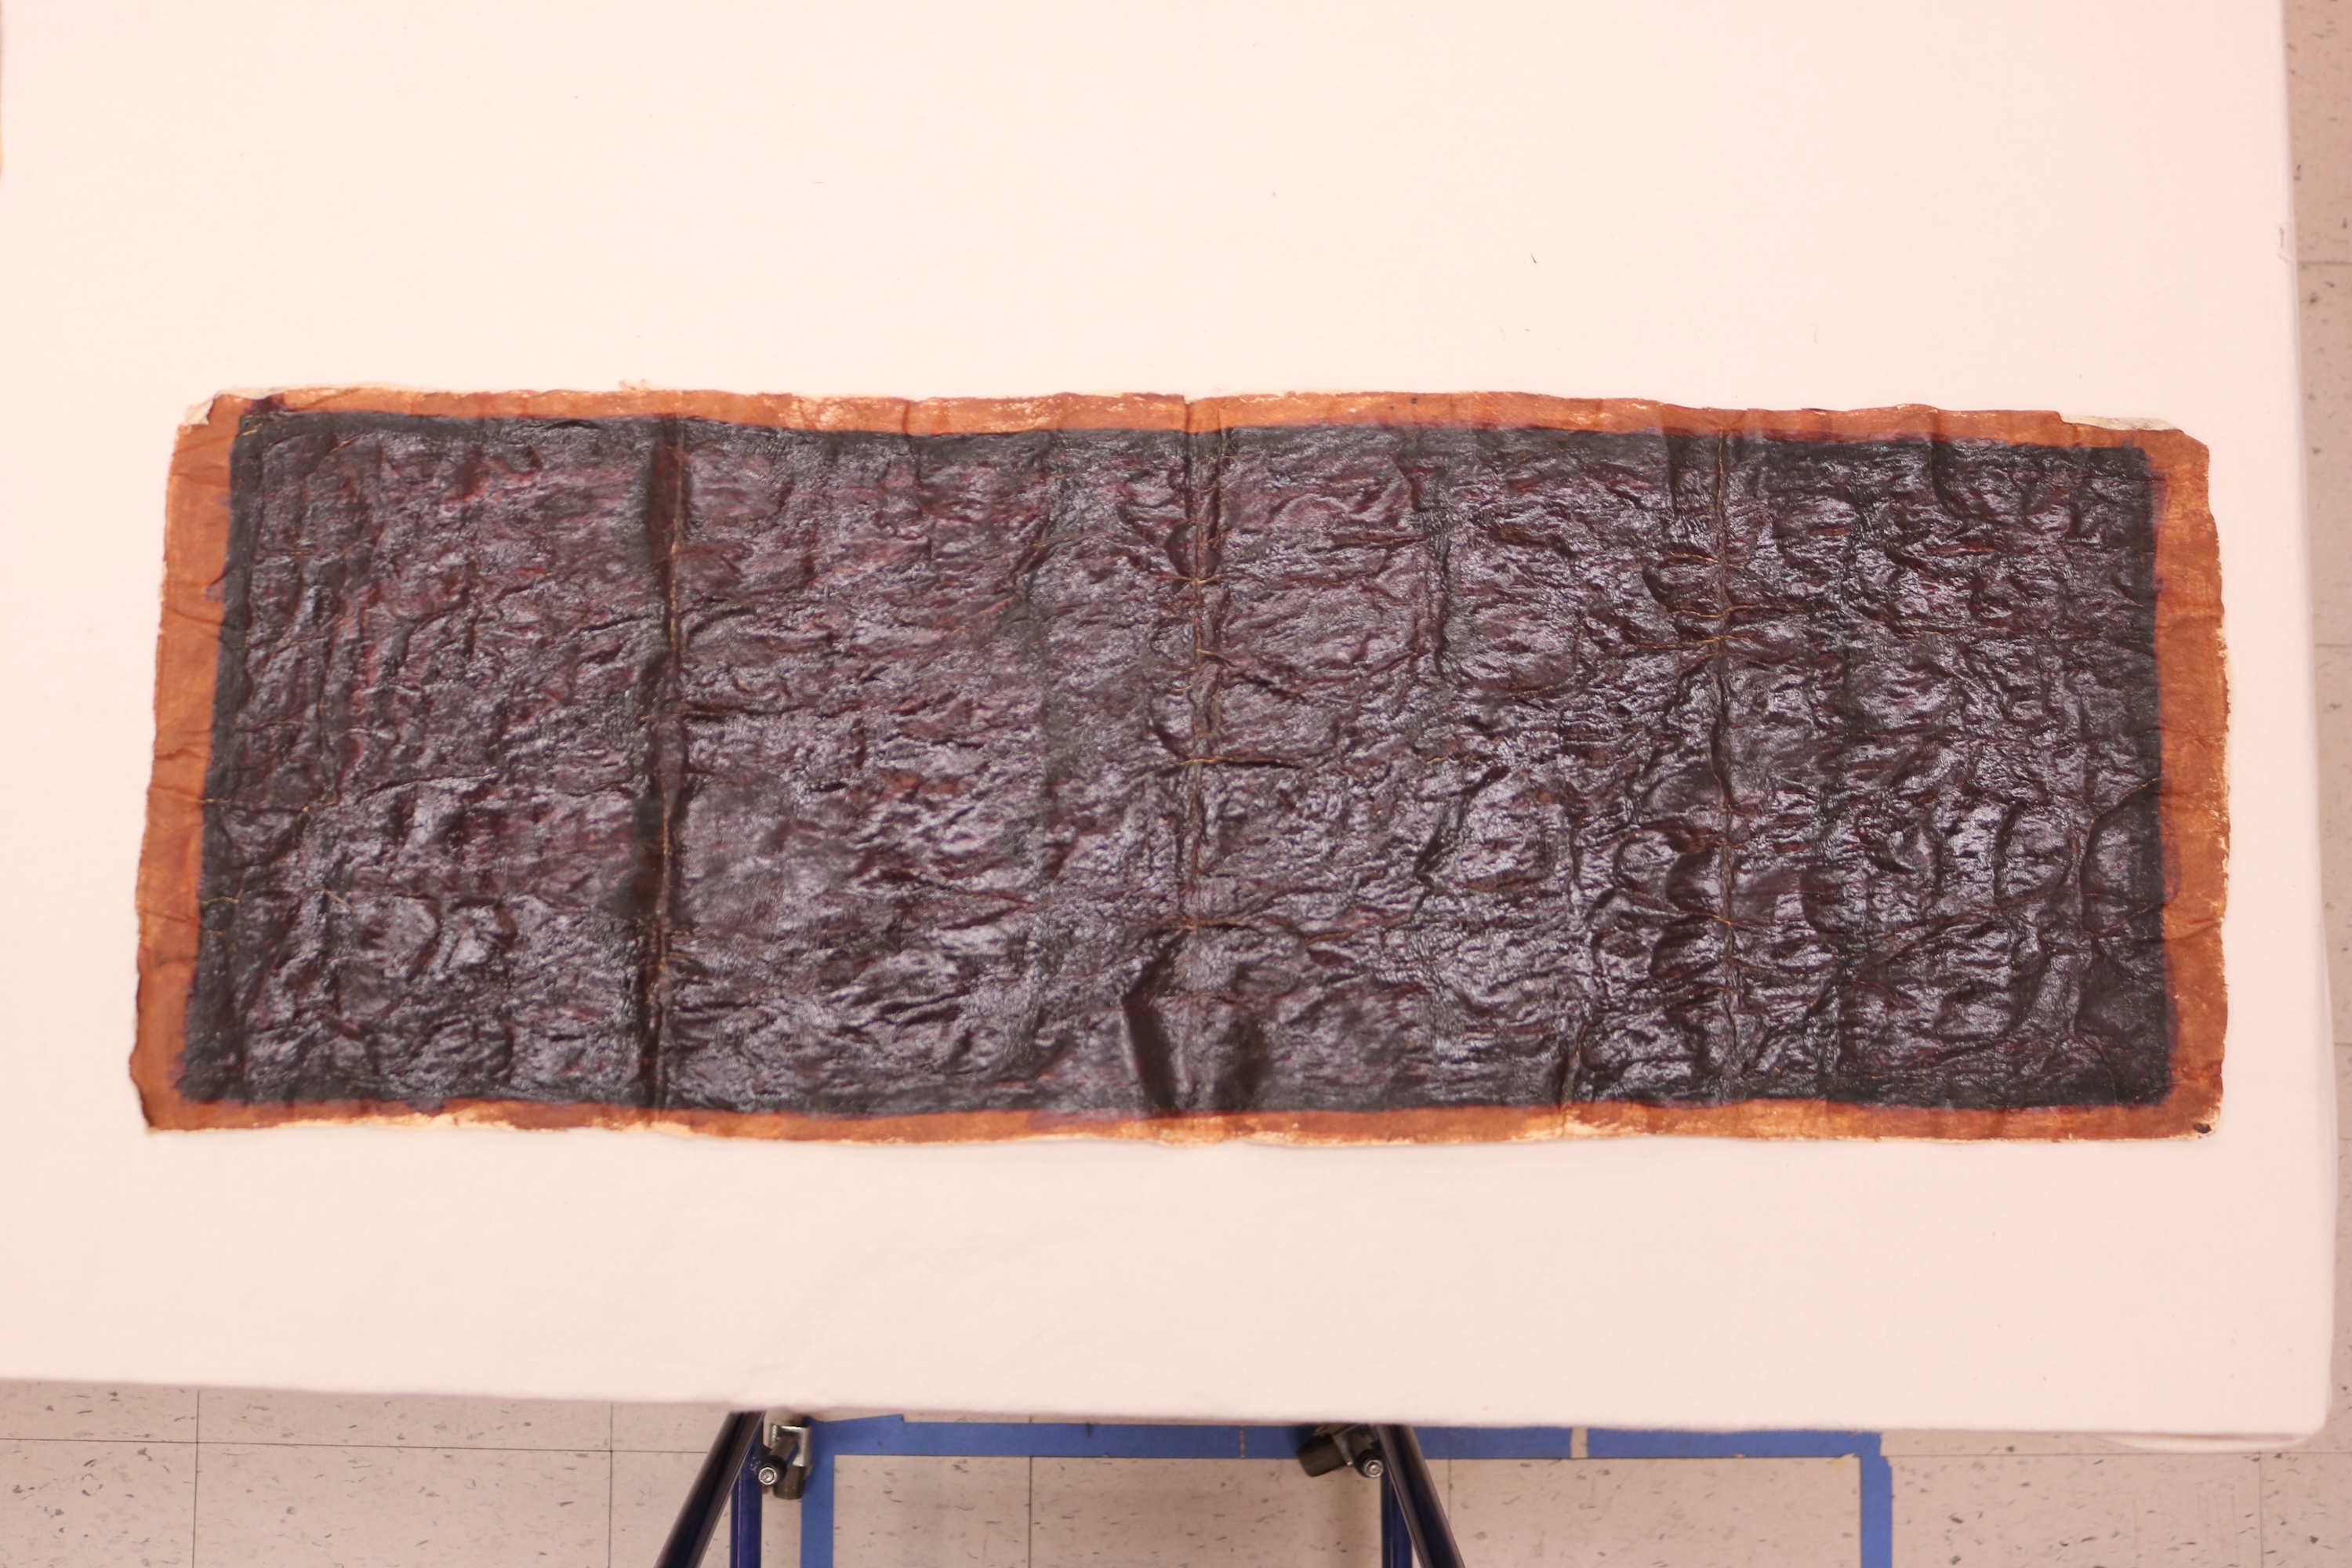 A painted barkcloth (siapo) that appears completely black due to oxidized dye